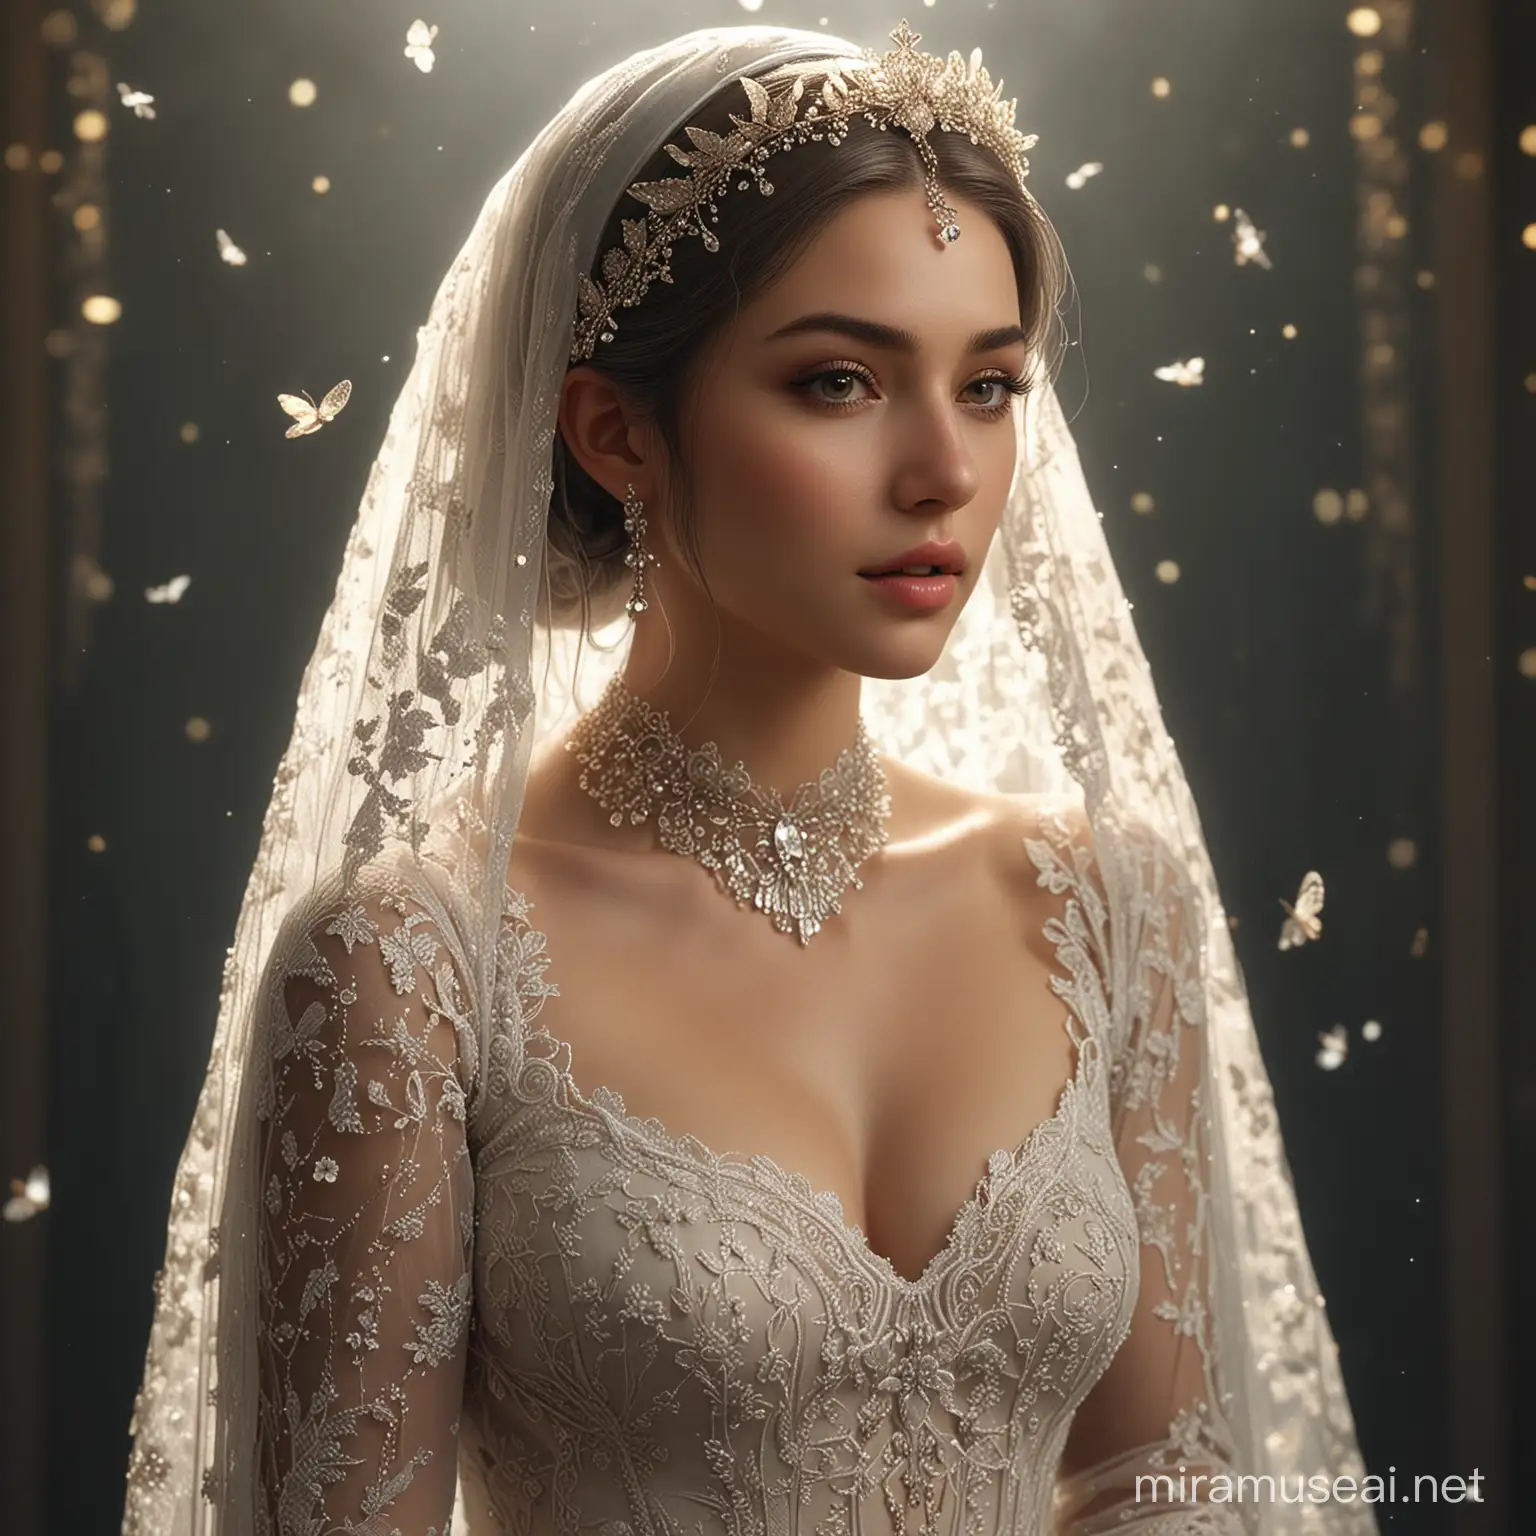 Ethereal Bride in Angelic Attire Surrounded by Mystical Light